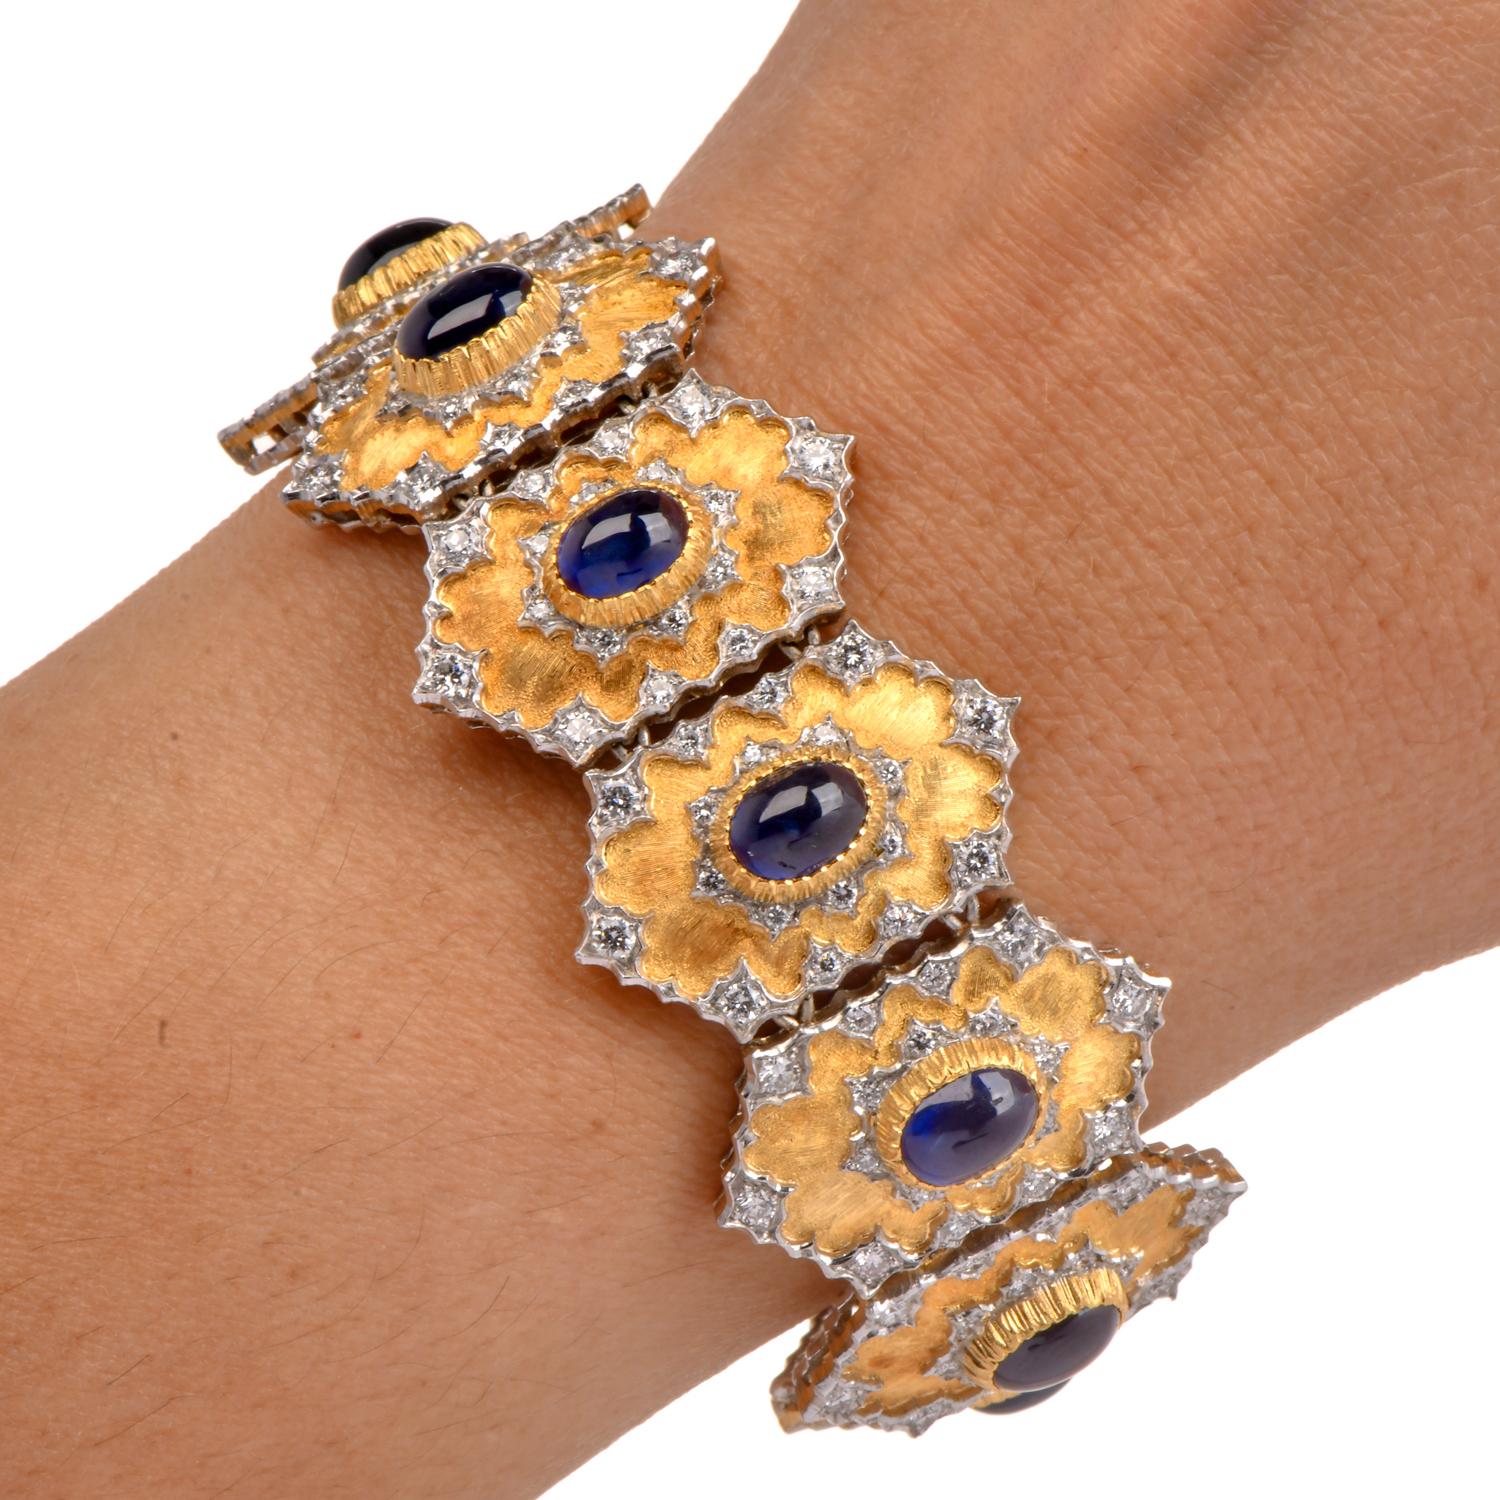 Circa 1980s Diamond Sapphire Hexagon Link 18K Gold Bracelet from the house of Gianmaria Buccellati, 11 section flexible bracelet

Presenting a beautiful Wide statement Bracelet forged in 18K Yellow and white gold from the house of Gianmaria